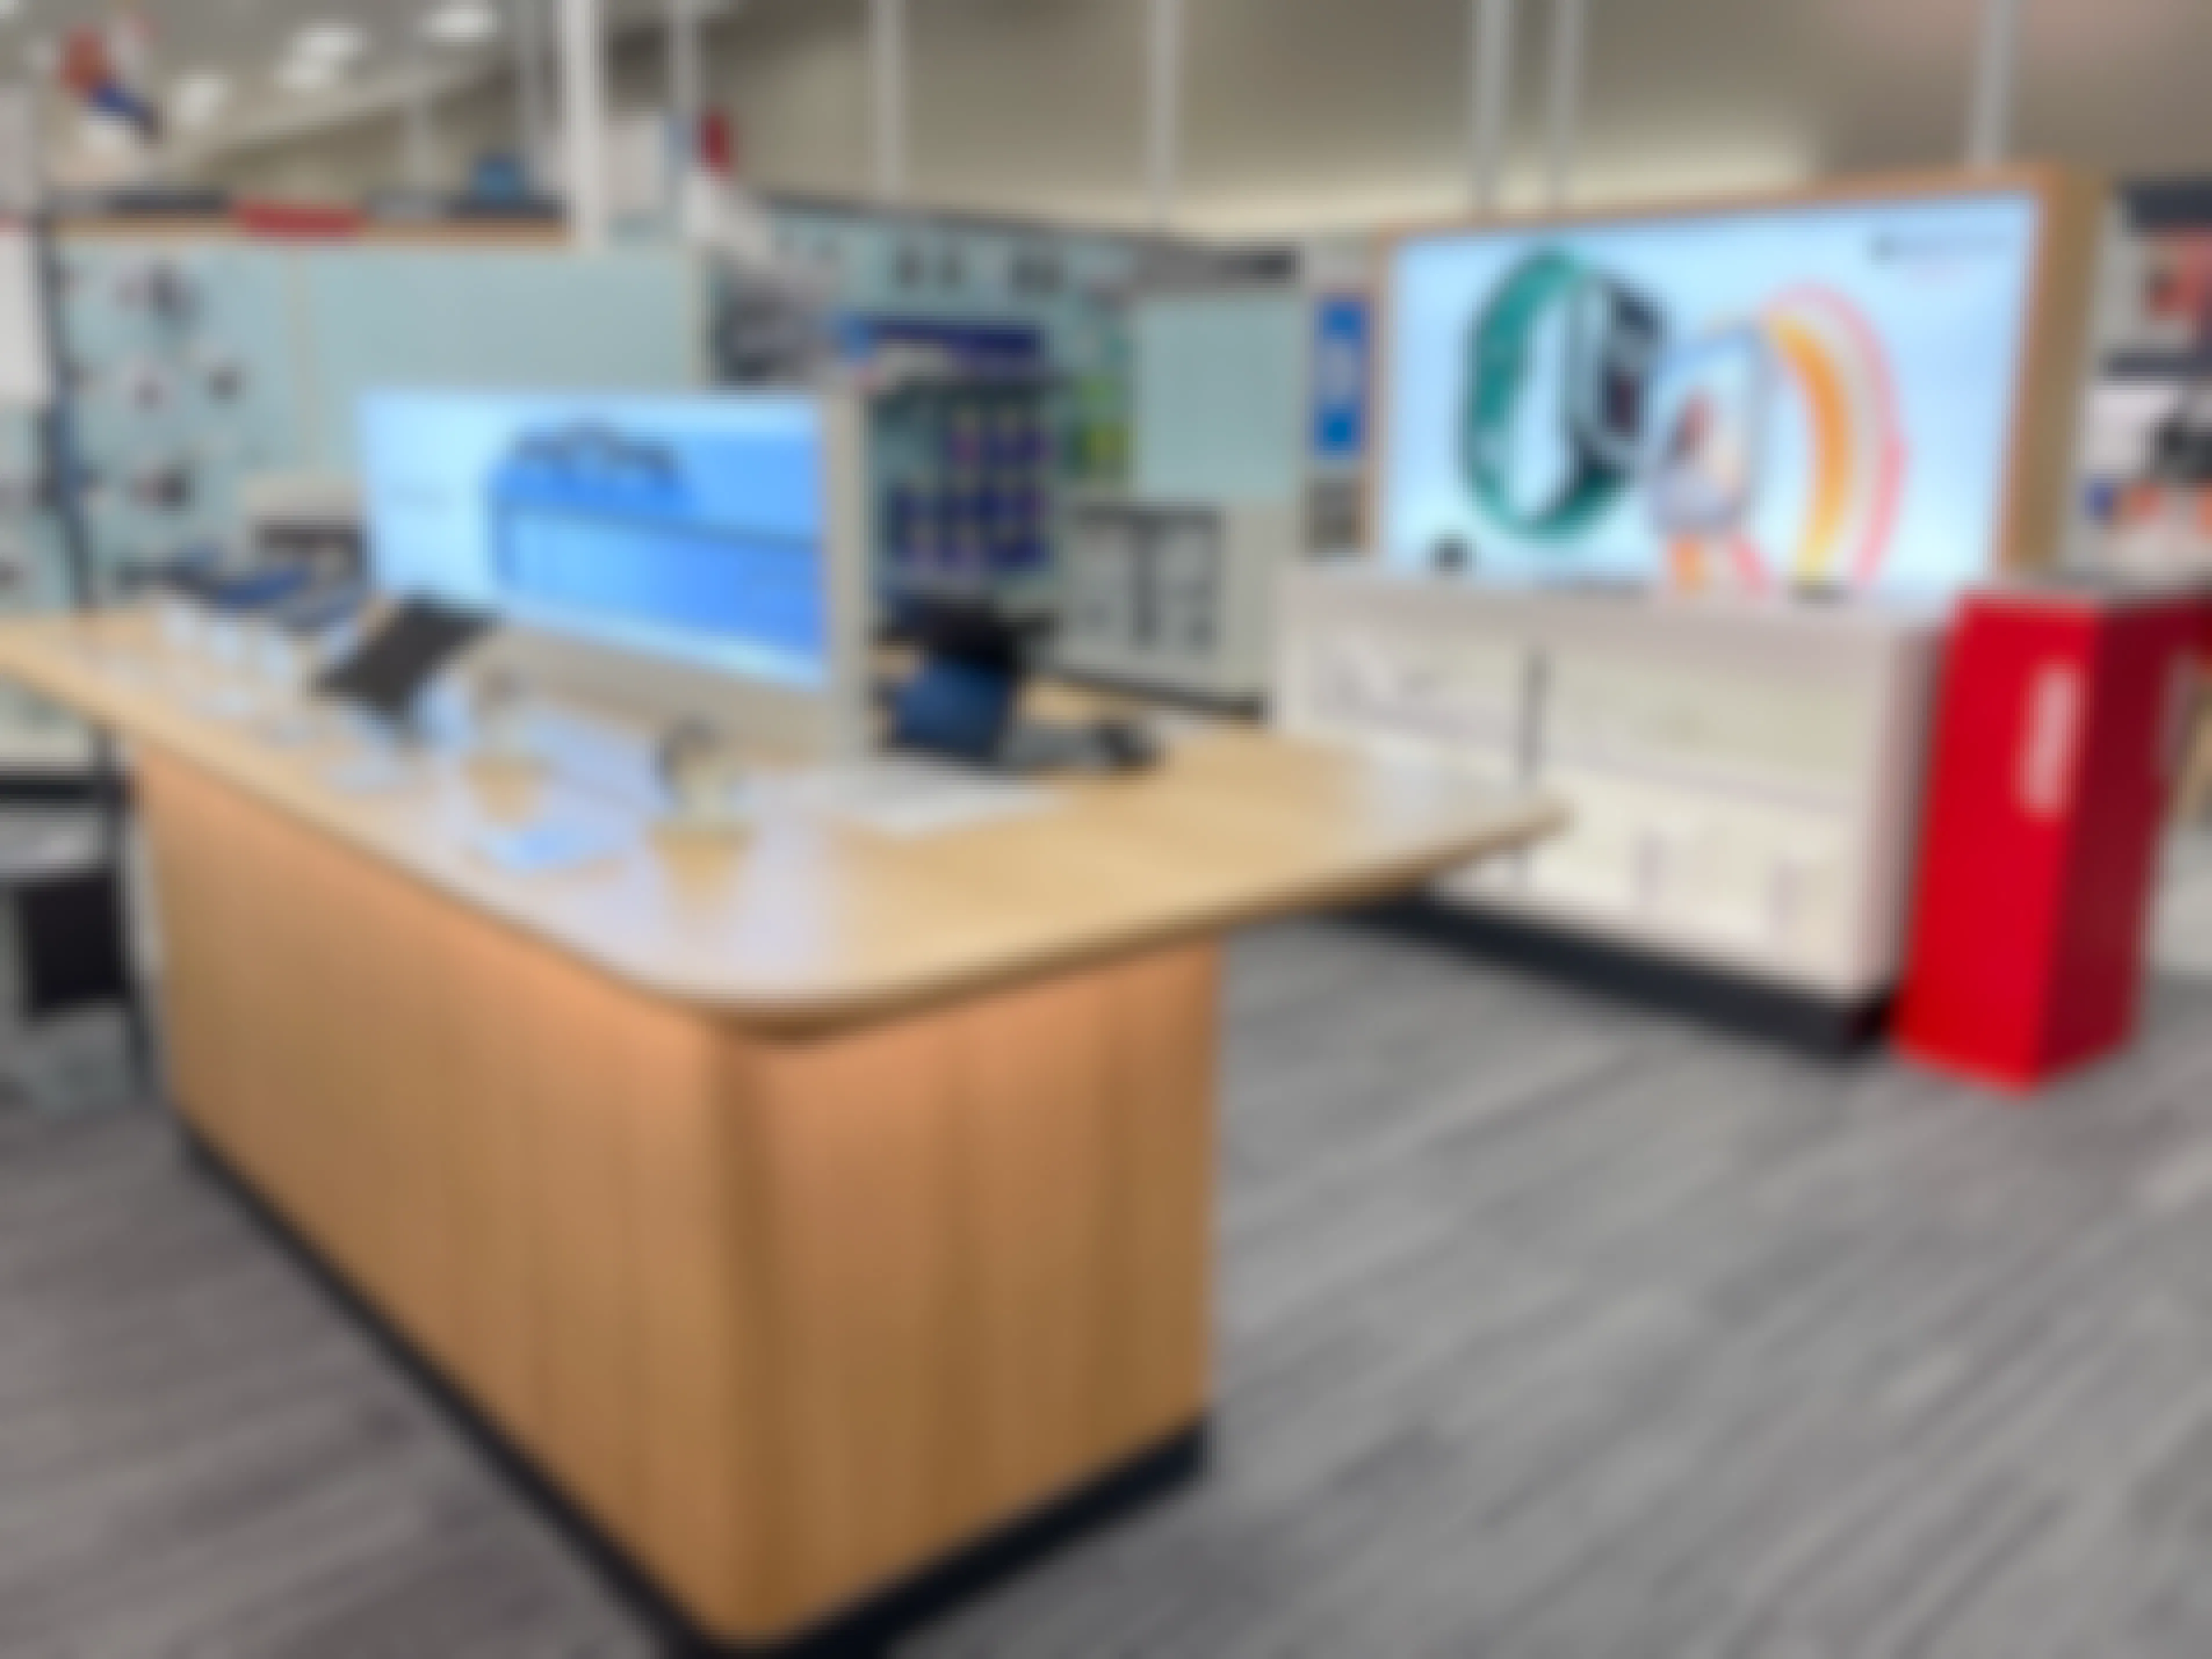 inside target electronics department with apple store layout